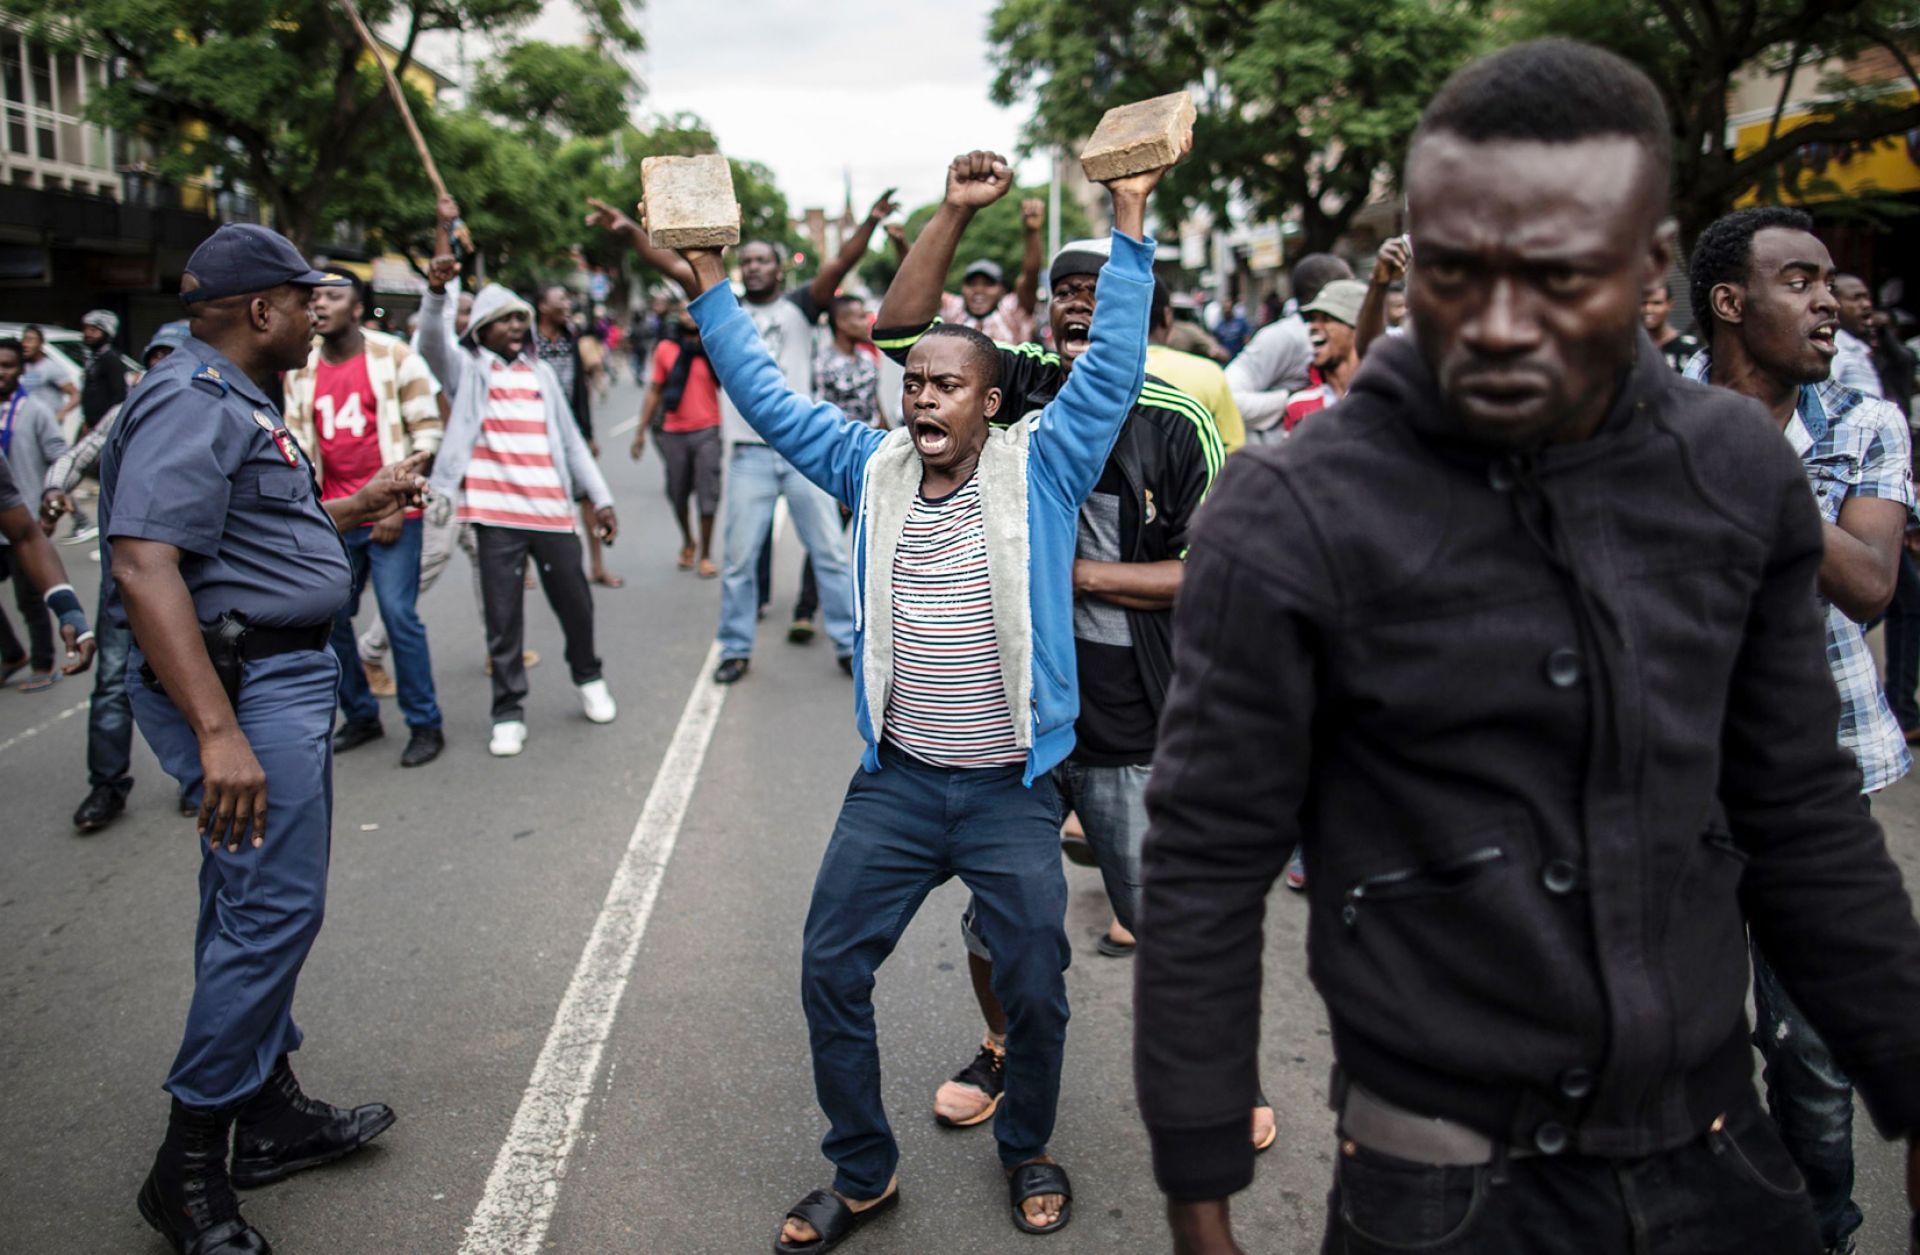 A crowd of Nigerians faces off with South Africans in Pretoria on Feb. 24 while a South African policeman (L) tries to calm them. Populism has taken root in the impoverished and unemployed segments of South African society.